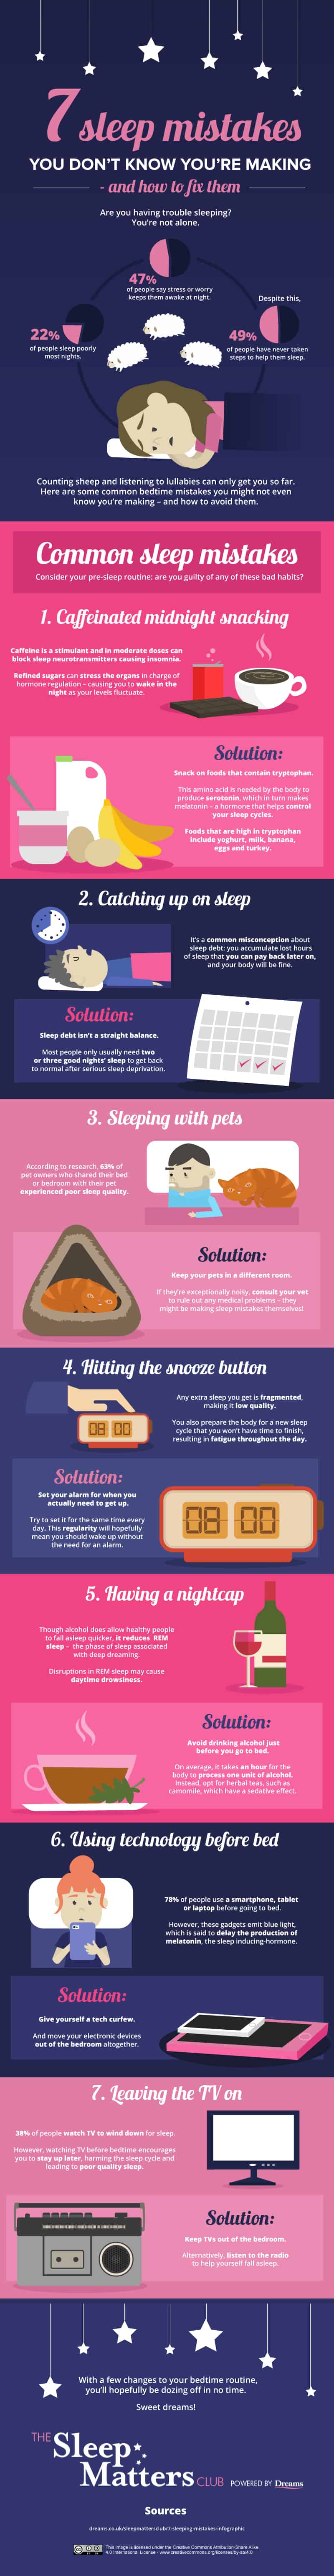 7-sleep-mistakes-you-dont-know-youre-making